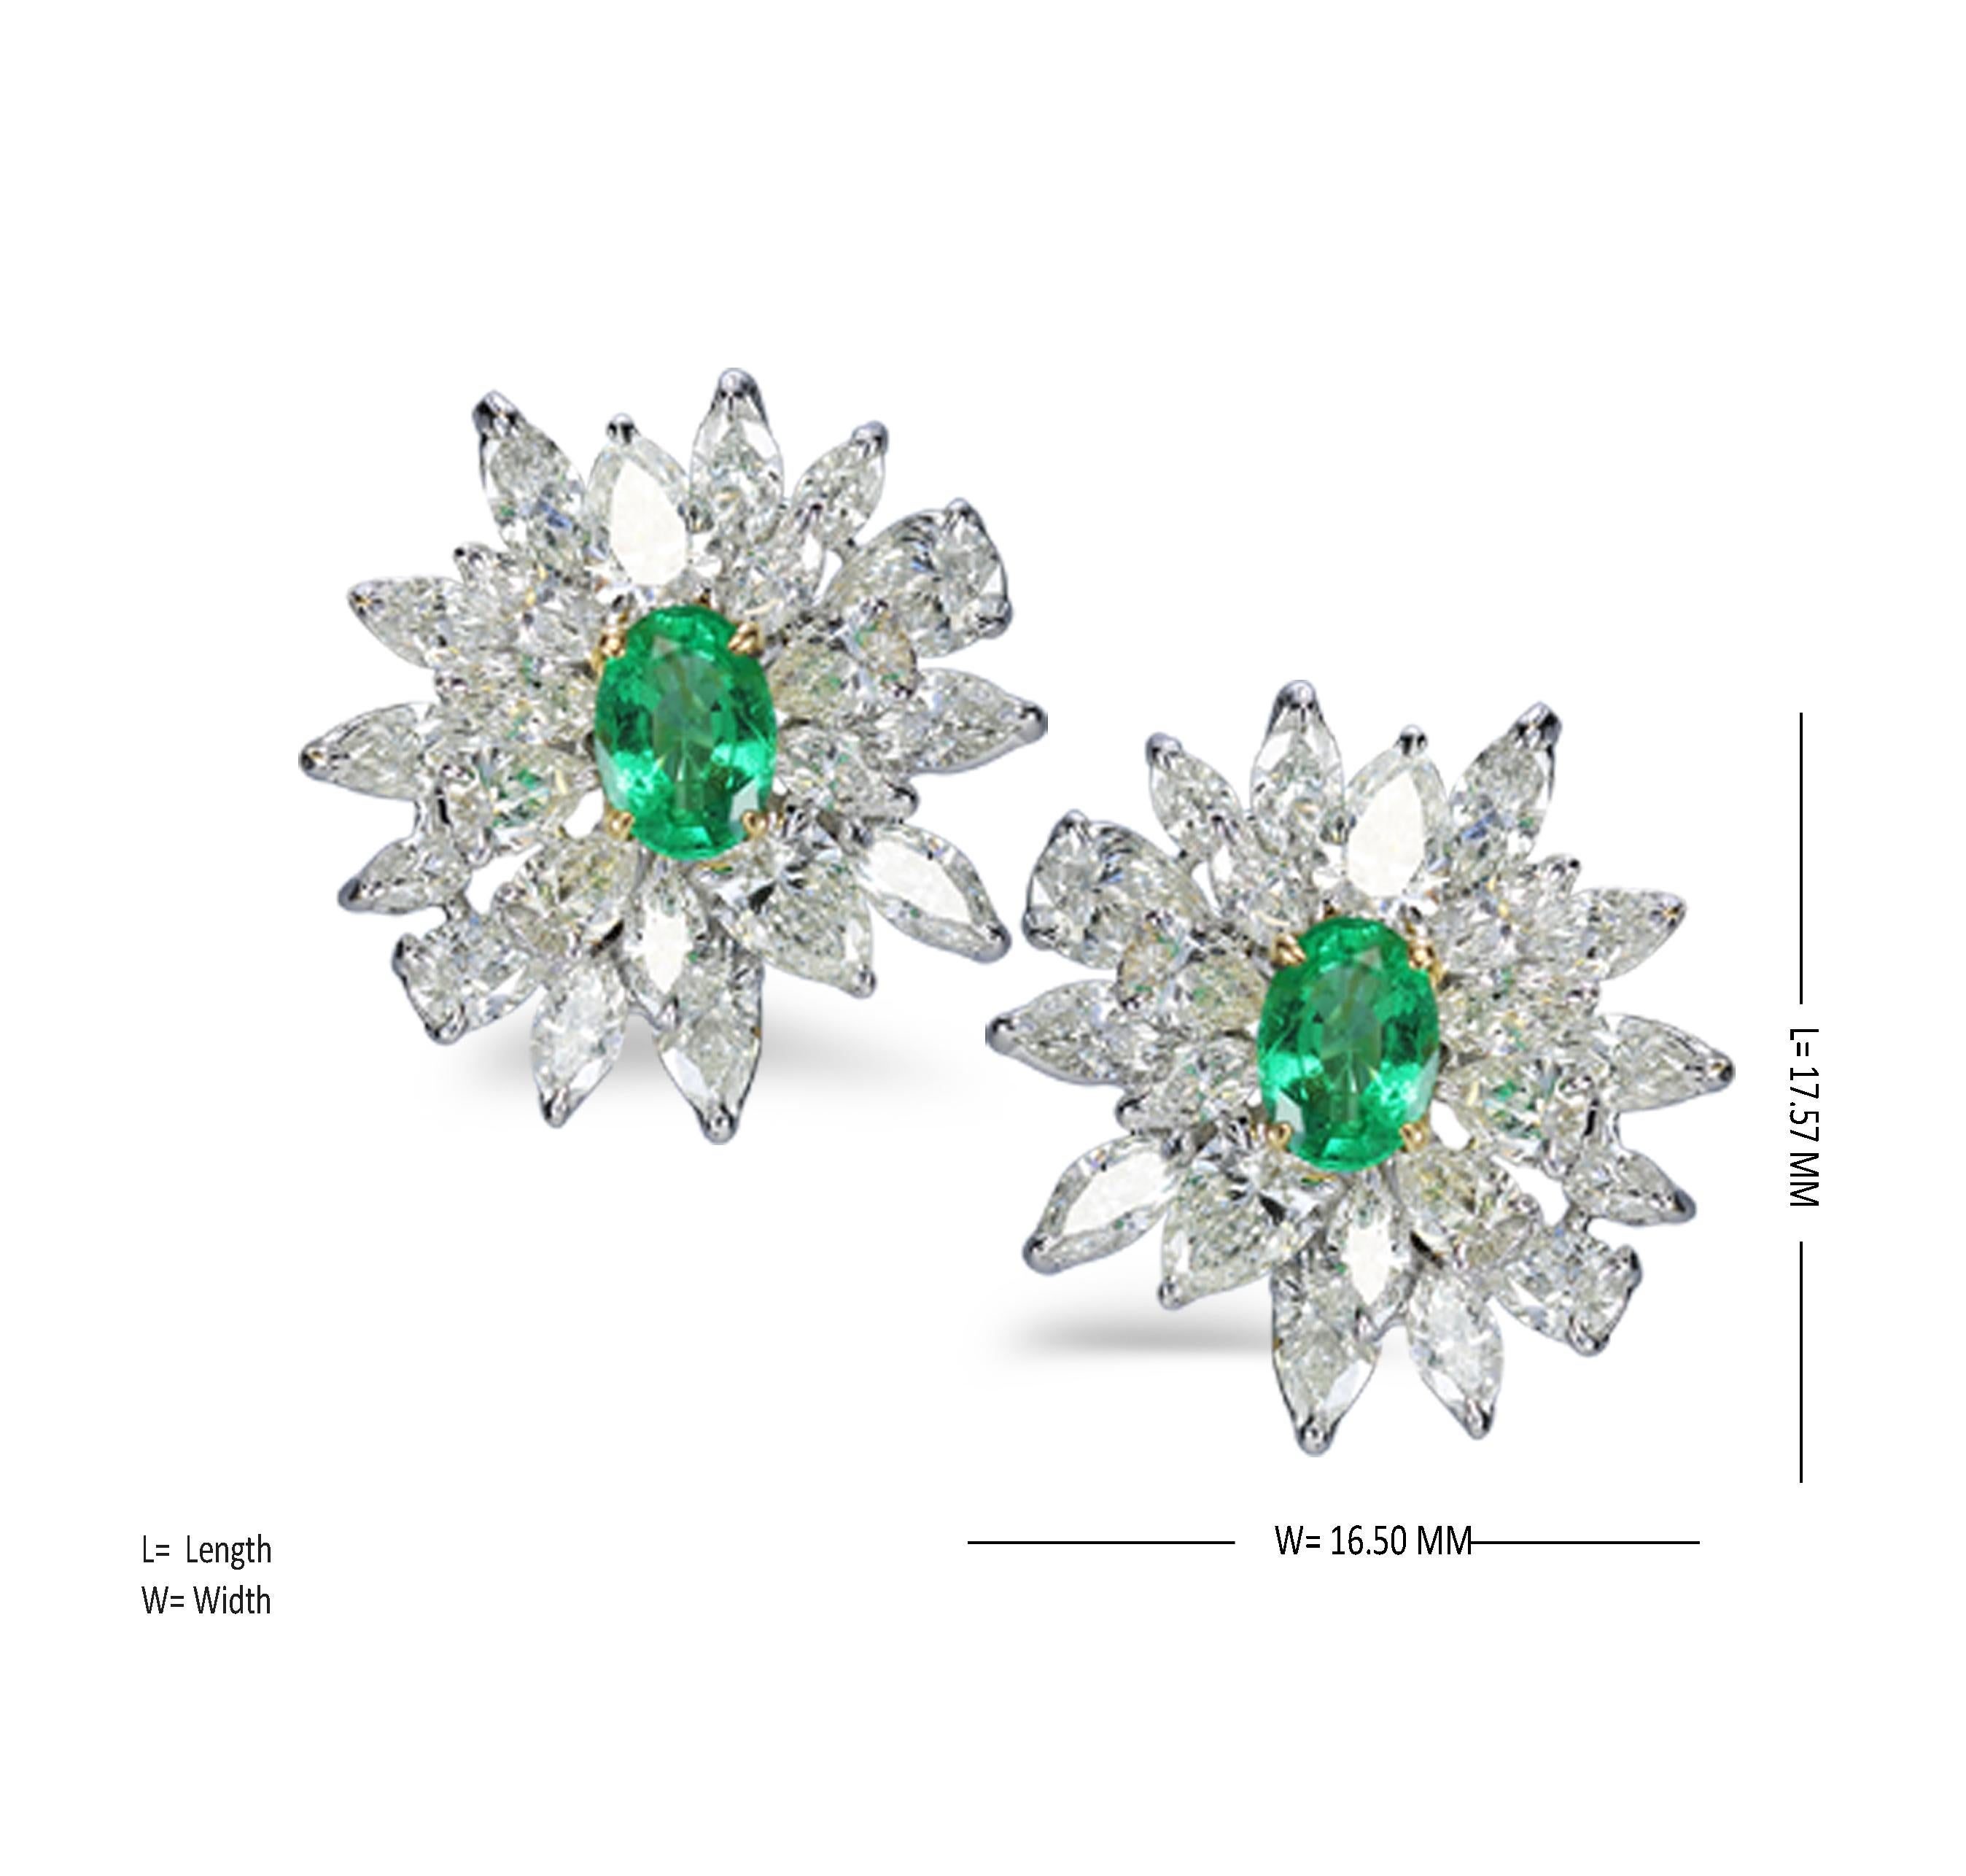 Studio Rêves Diamonds and Emerald Stud Earrings in 18 Karat Gold In New Condition For Sale In Mumbai, Maharashtra